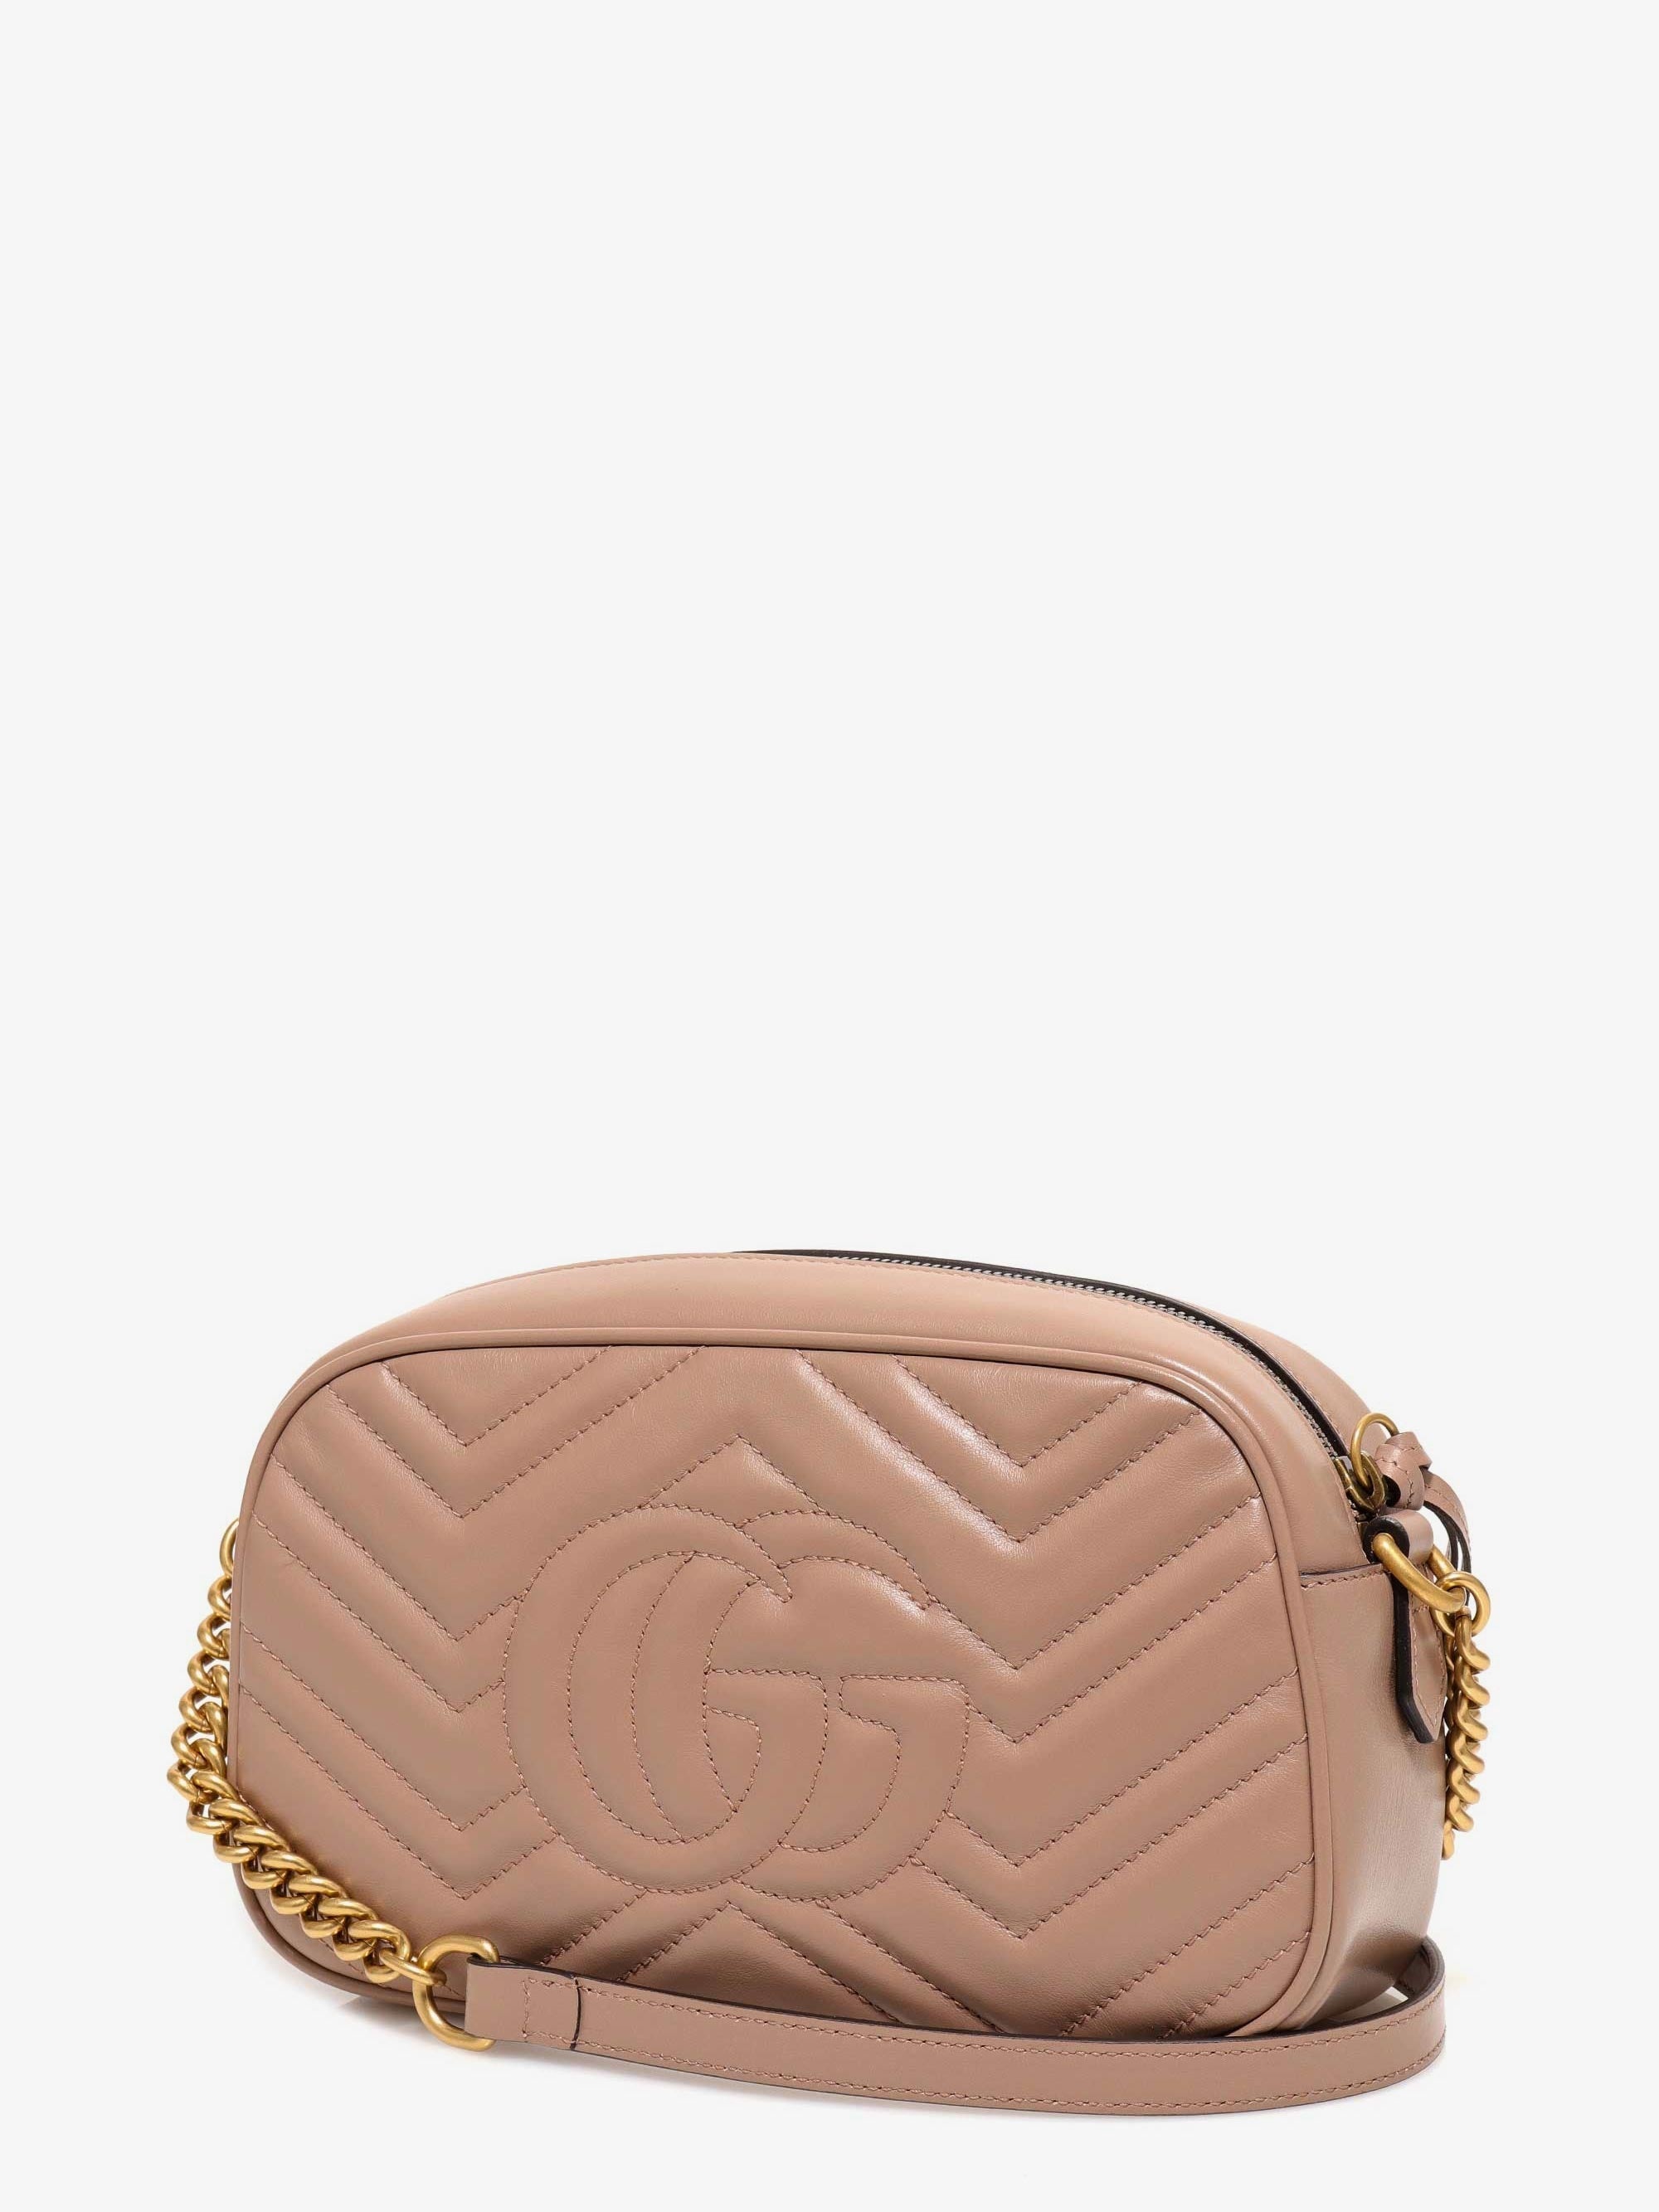 Gucci Woman Gg Marmont Woman Pink Shoulder Bags - 2